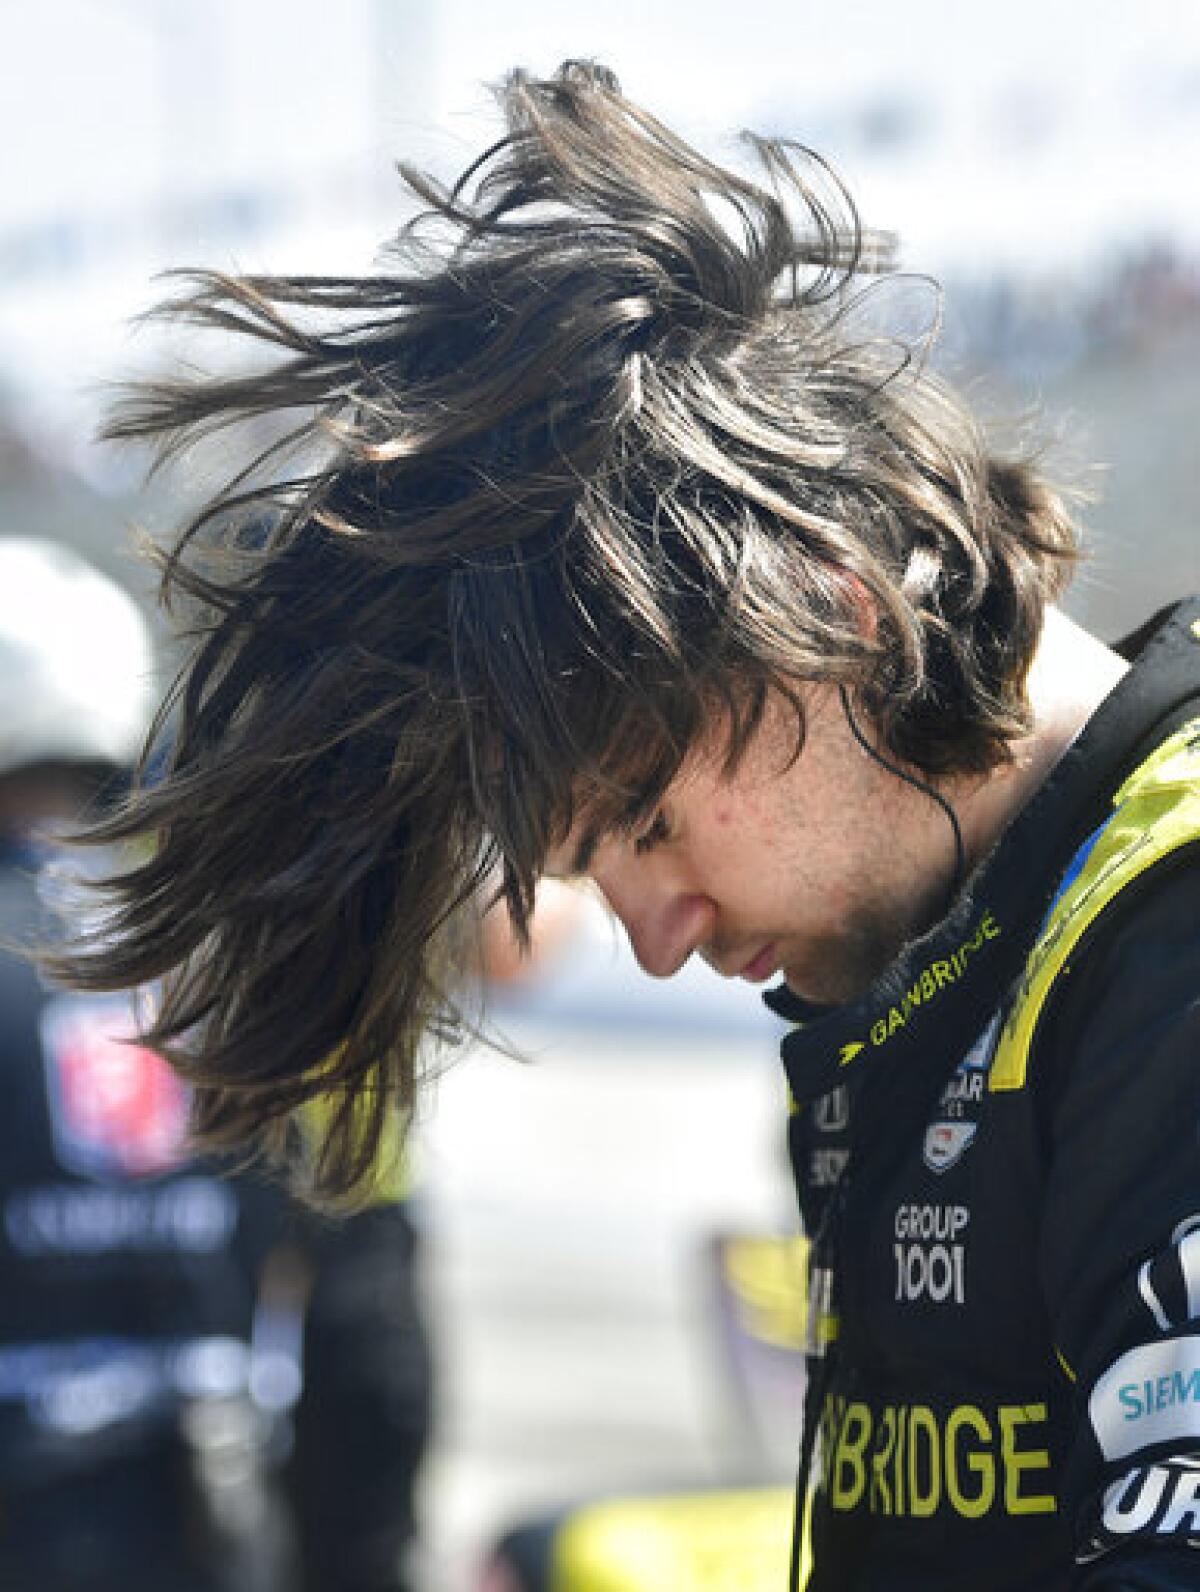 Indycar driver Colton Herta flips his hair after climbing from his race car following qualifying for the Grand Prix of Long Beach auto race Saturday, Sept. 25, 2021, in Long Beach, Calif. (Will Lester/The Orange County Register via AP)